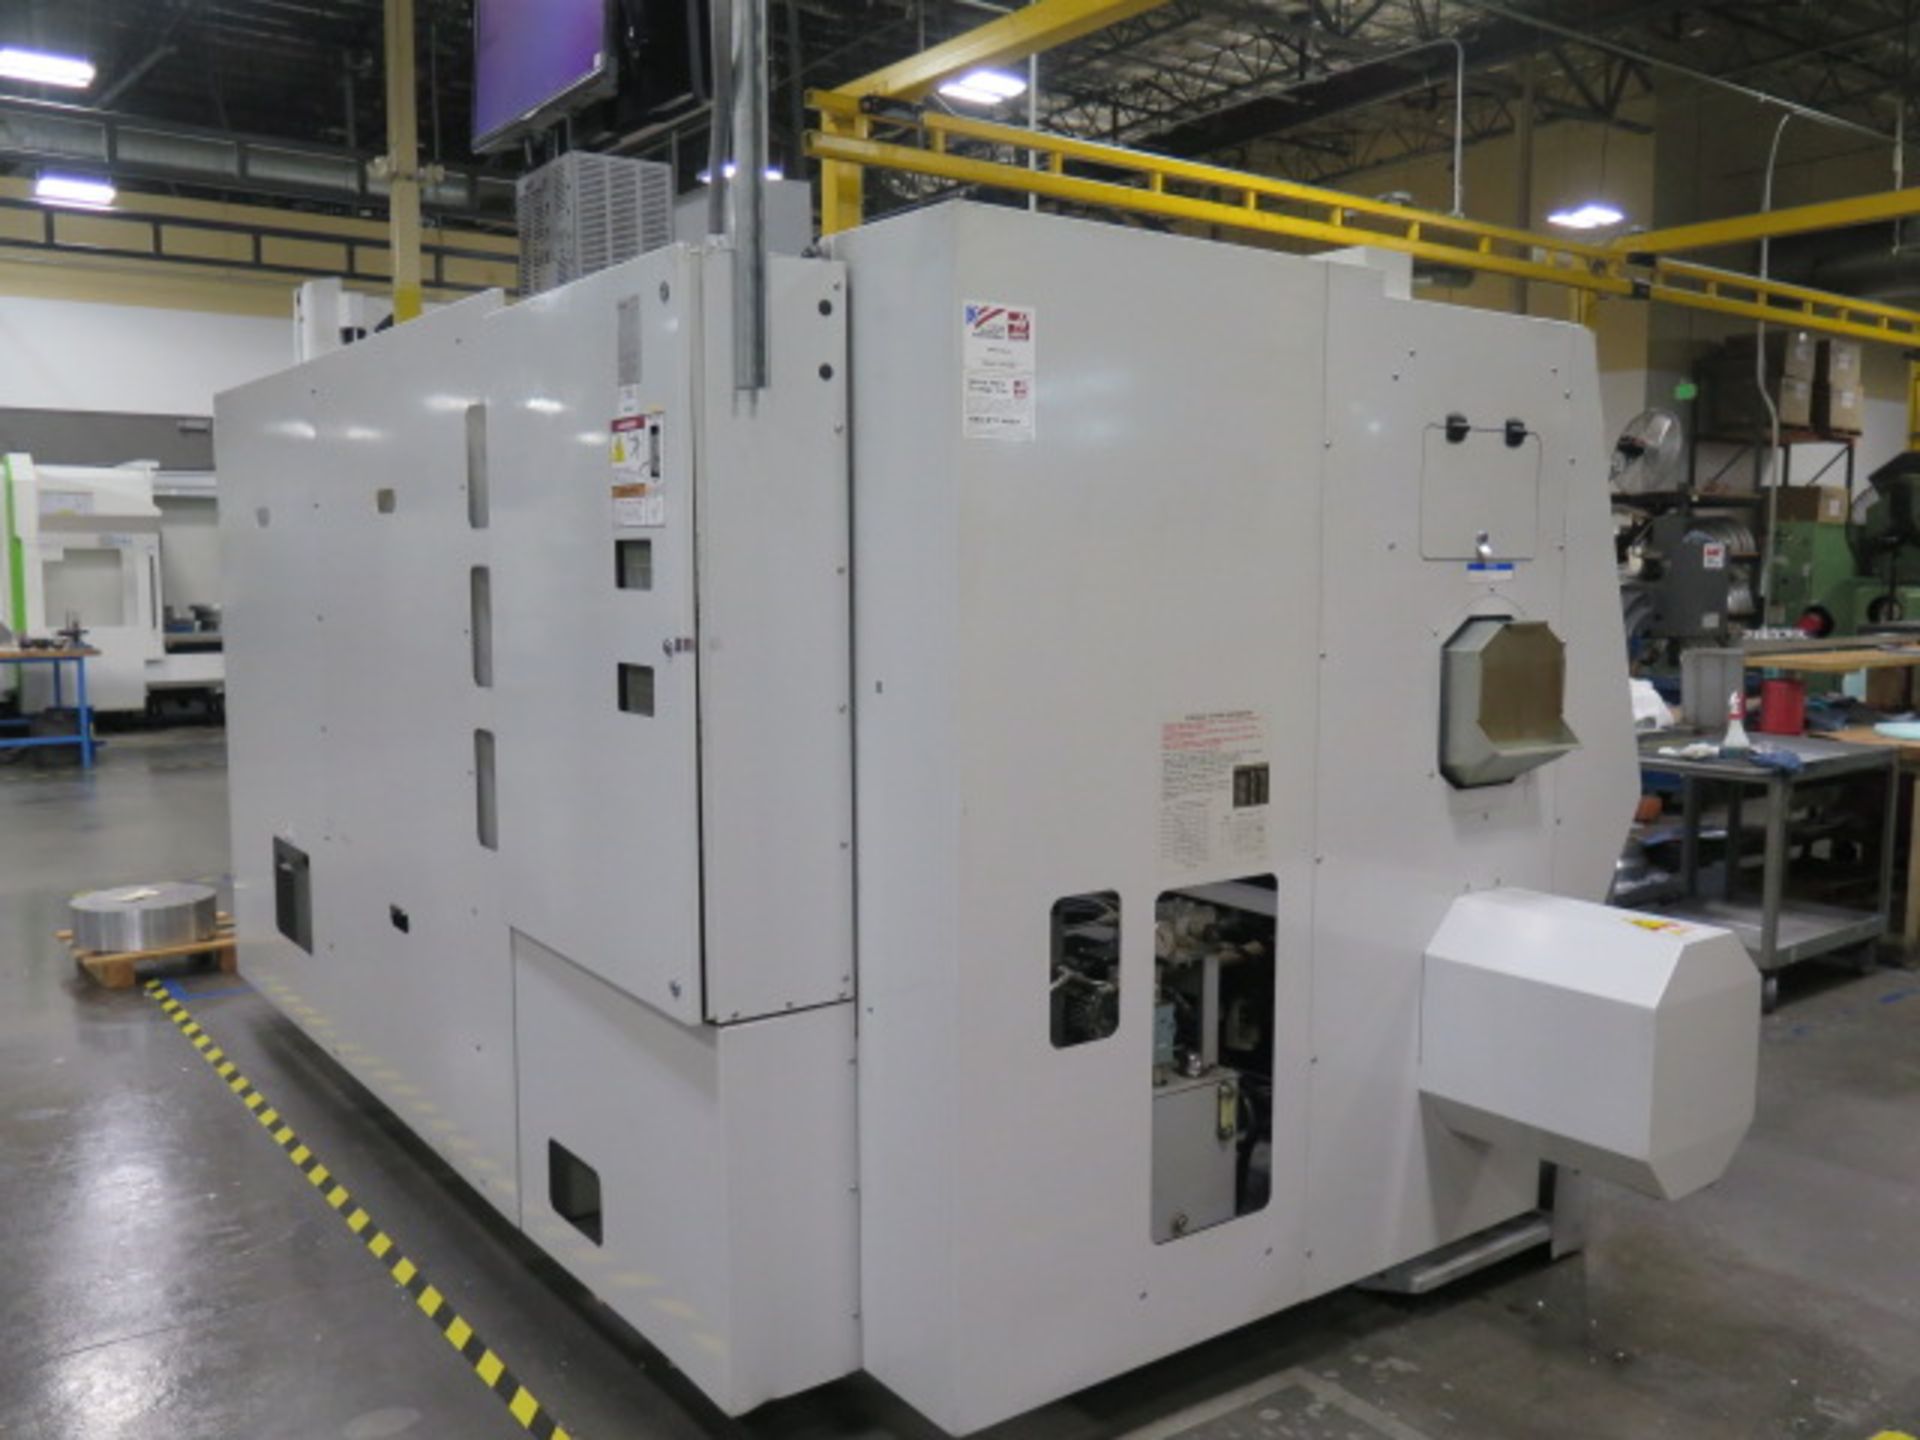 2007 Haas SL-40 CNC Turning Center s/n 3078757 w/ Haas Controls, Hand Wheel, Tool Presetter, 12-St - Image 3 of 18